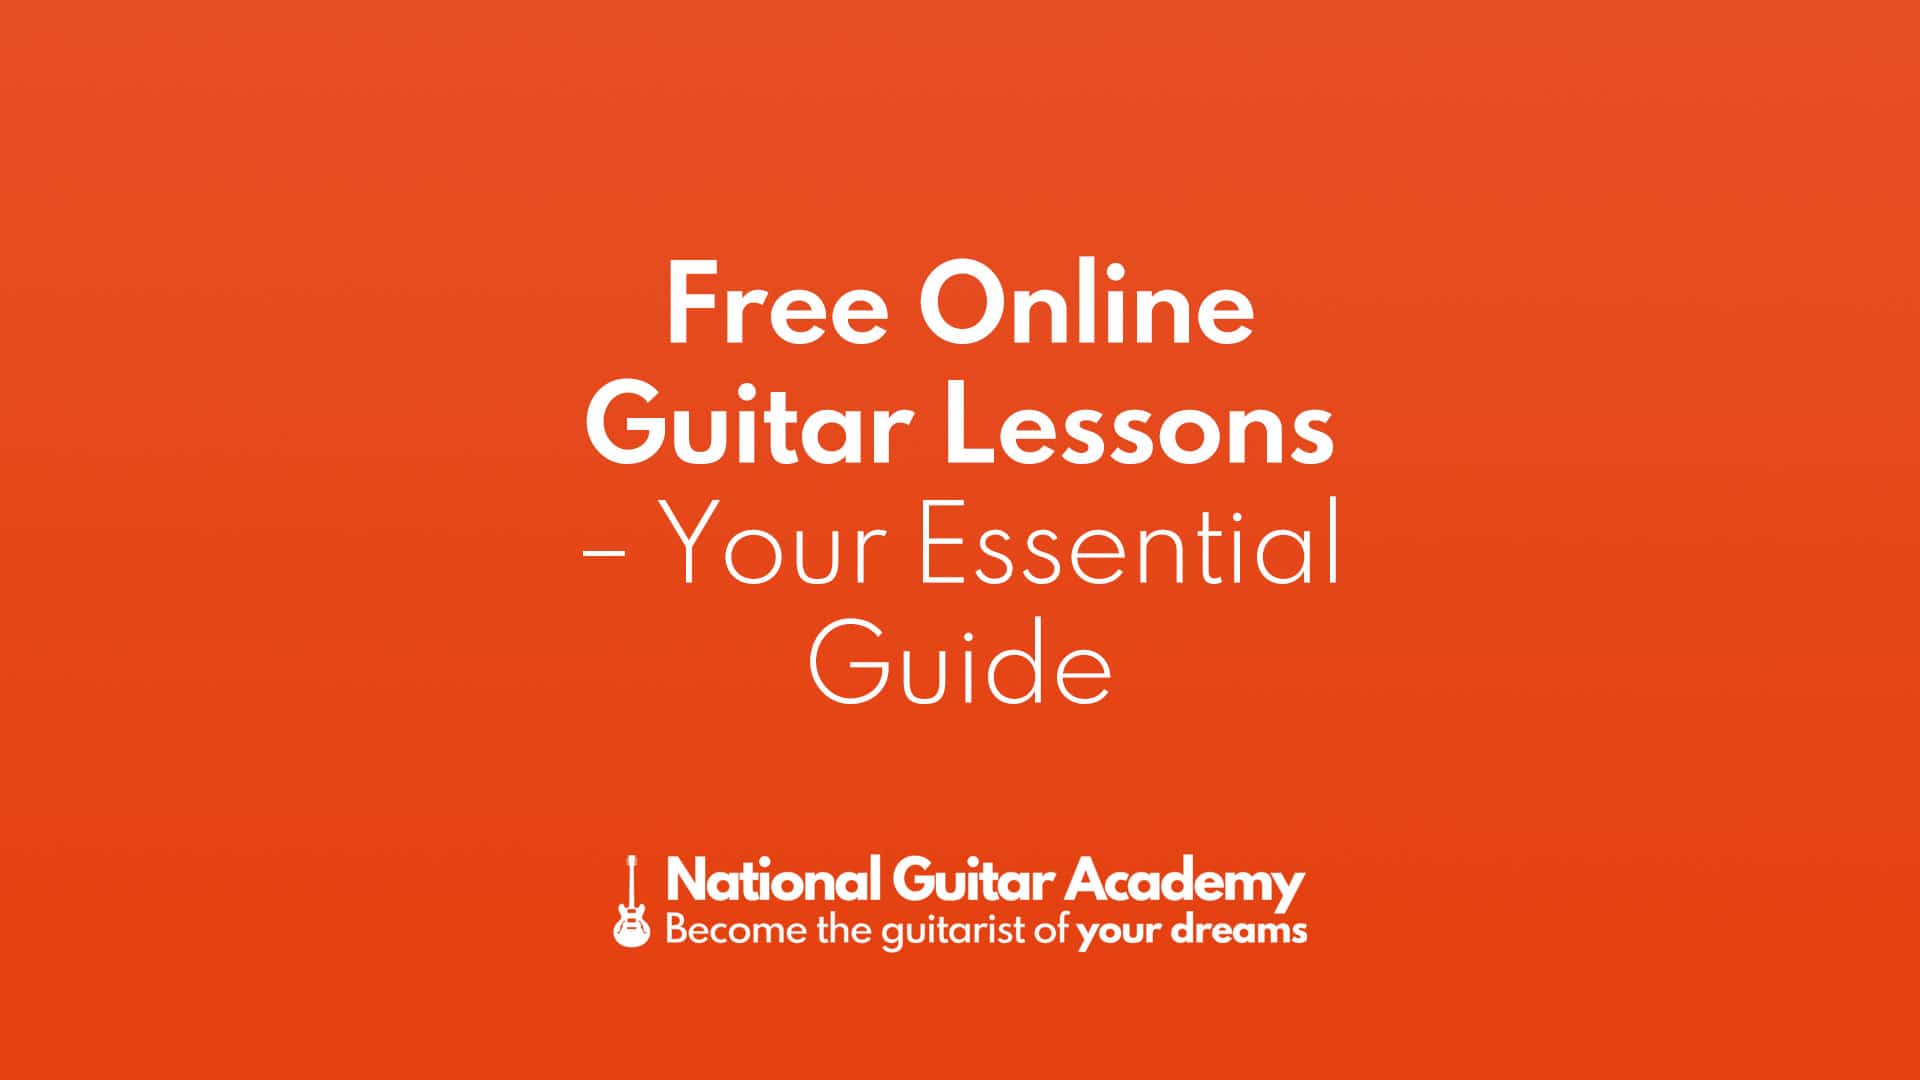 Get free rock guitar lessons with Orange Amplification's online course and  a free online music exam - Guitar World